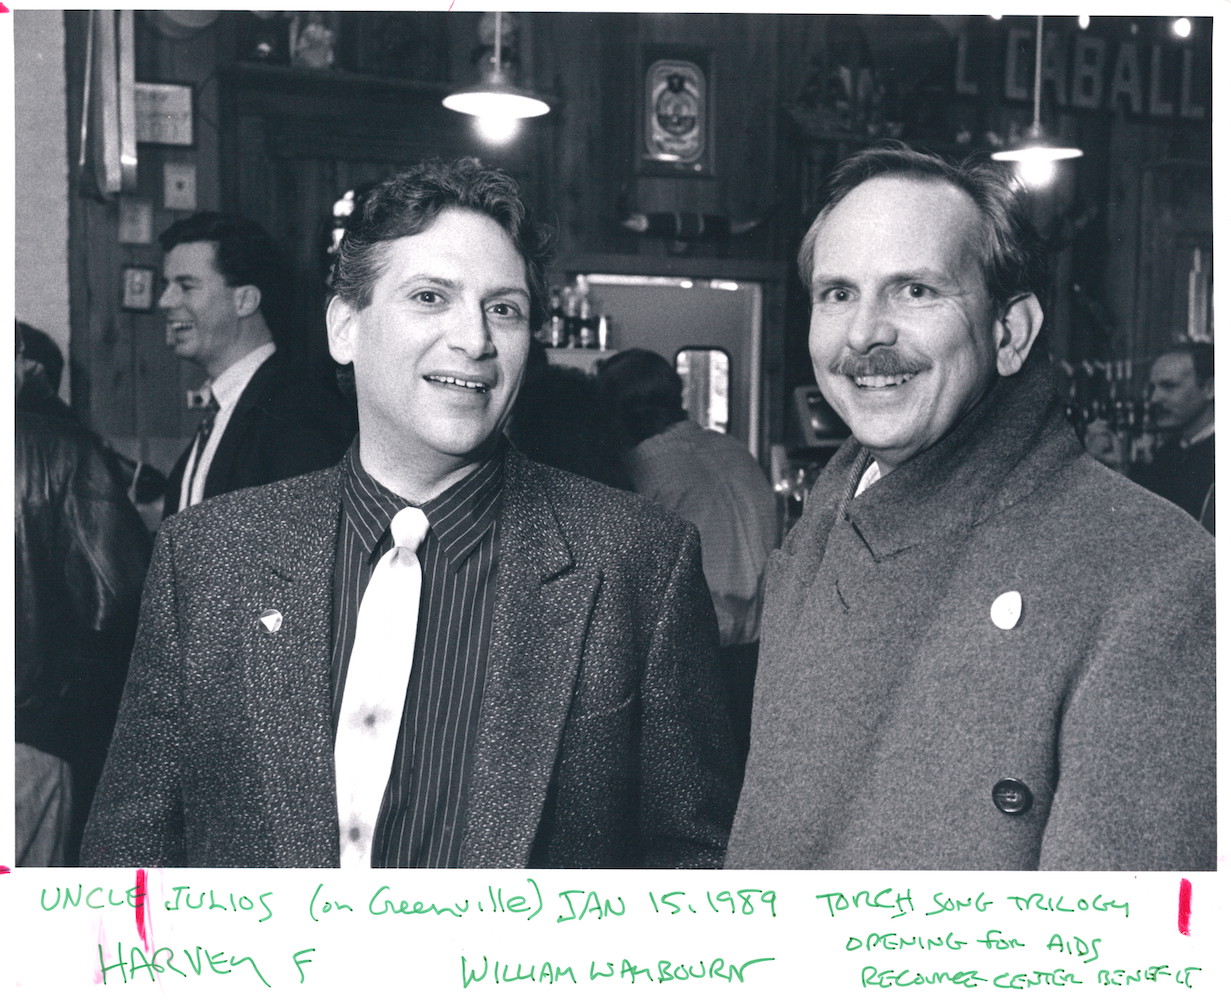 William Waybourn and Harvey Fierstein, Dallas, TX, circa 1988. William shares, “Harvey came to Dallas to support us after Judge Jack Hampton gave a murderer a lighter sentence because he 